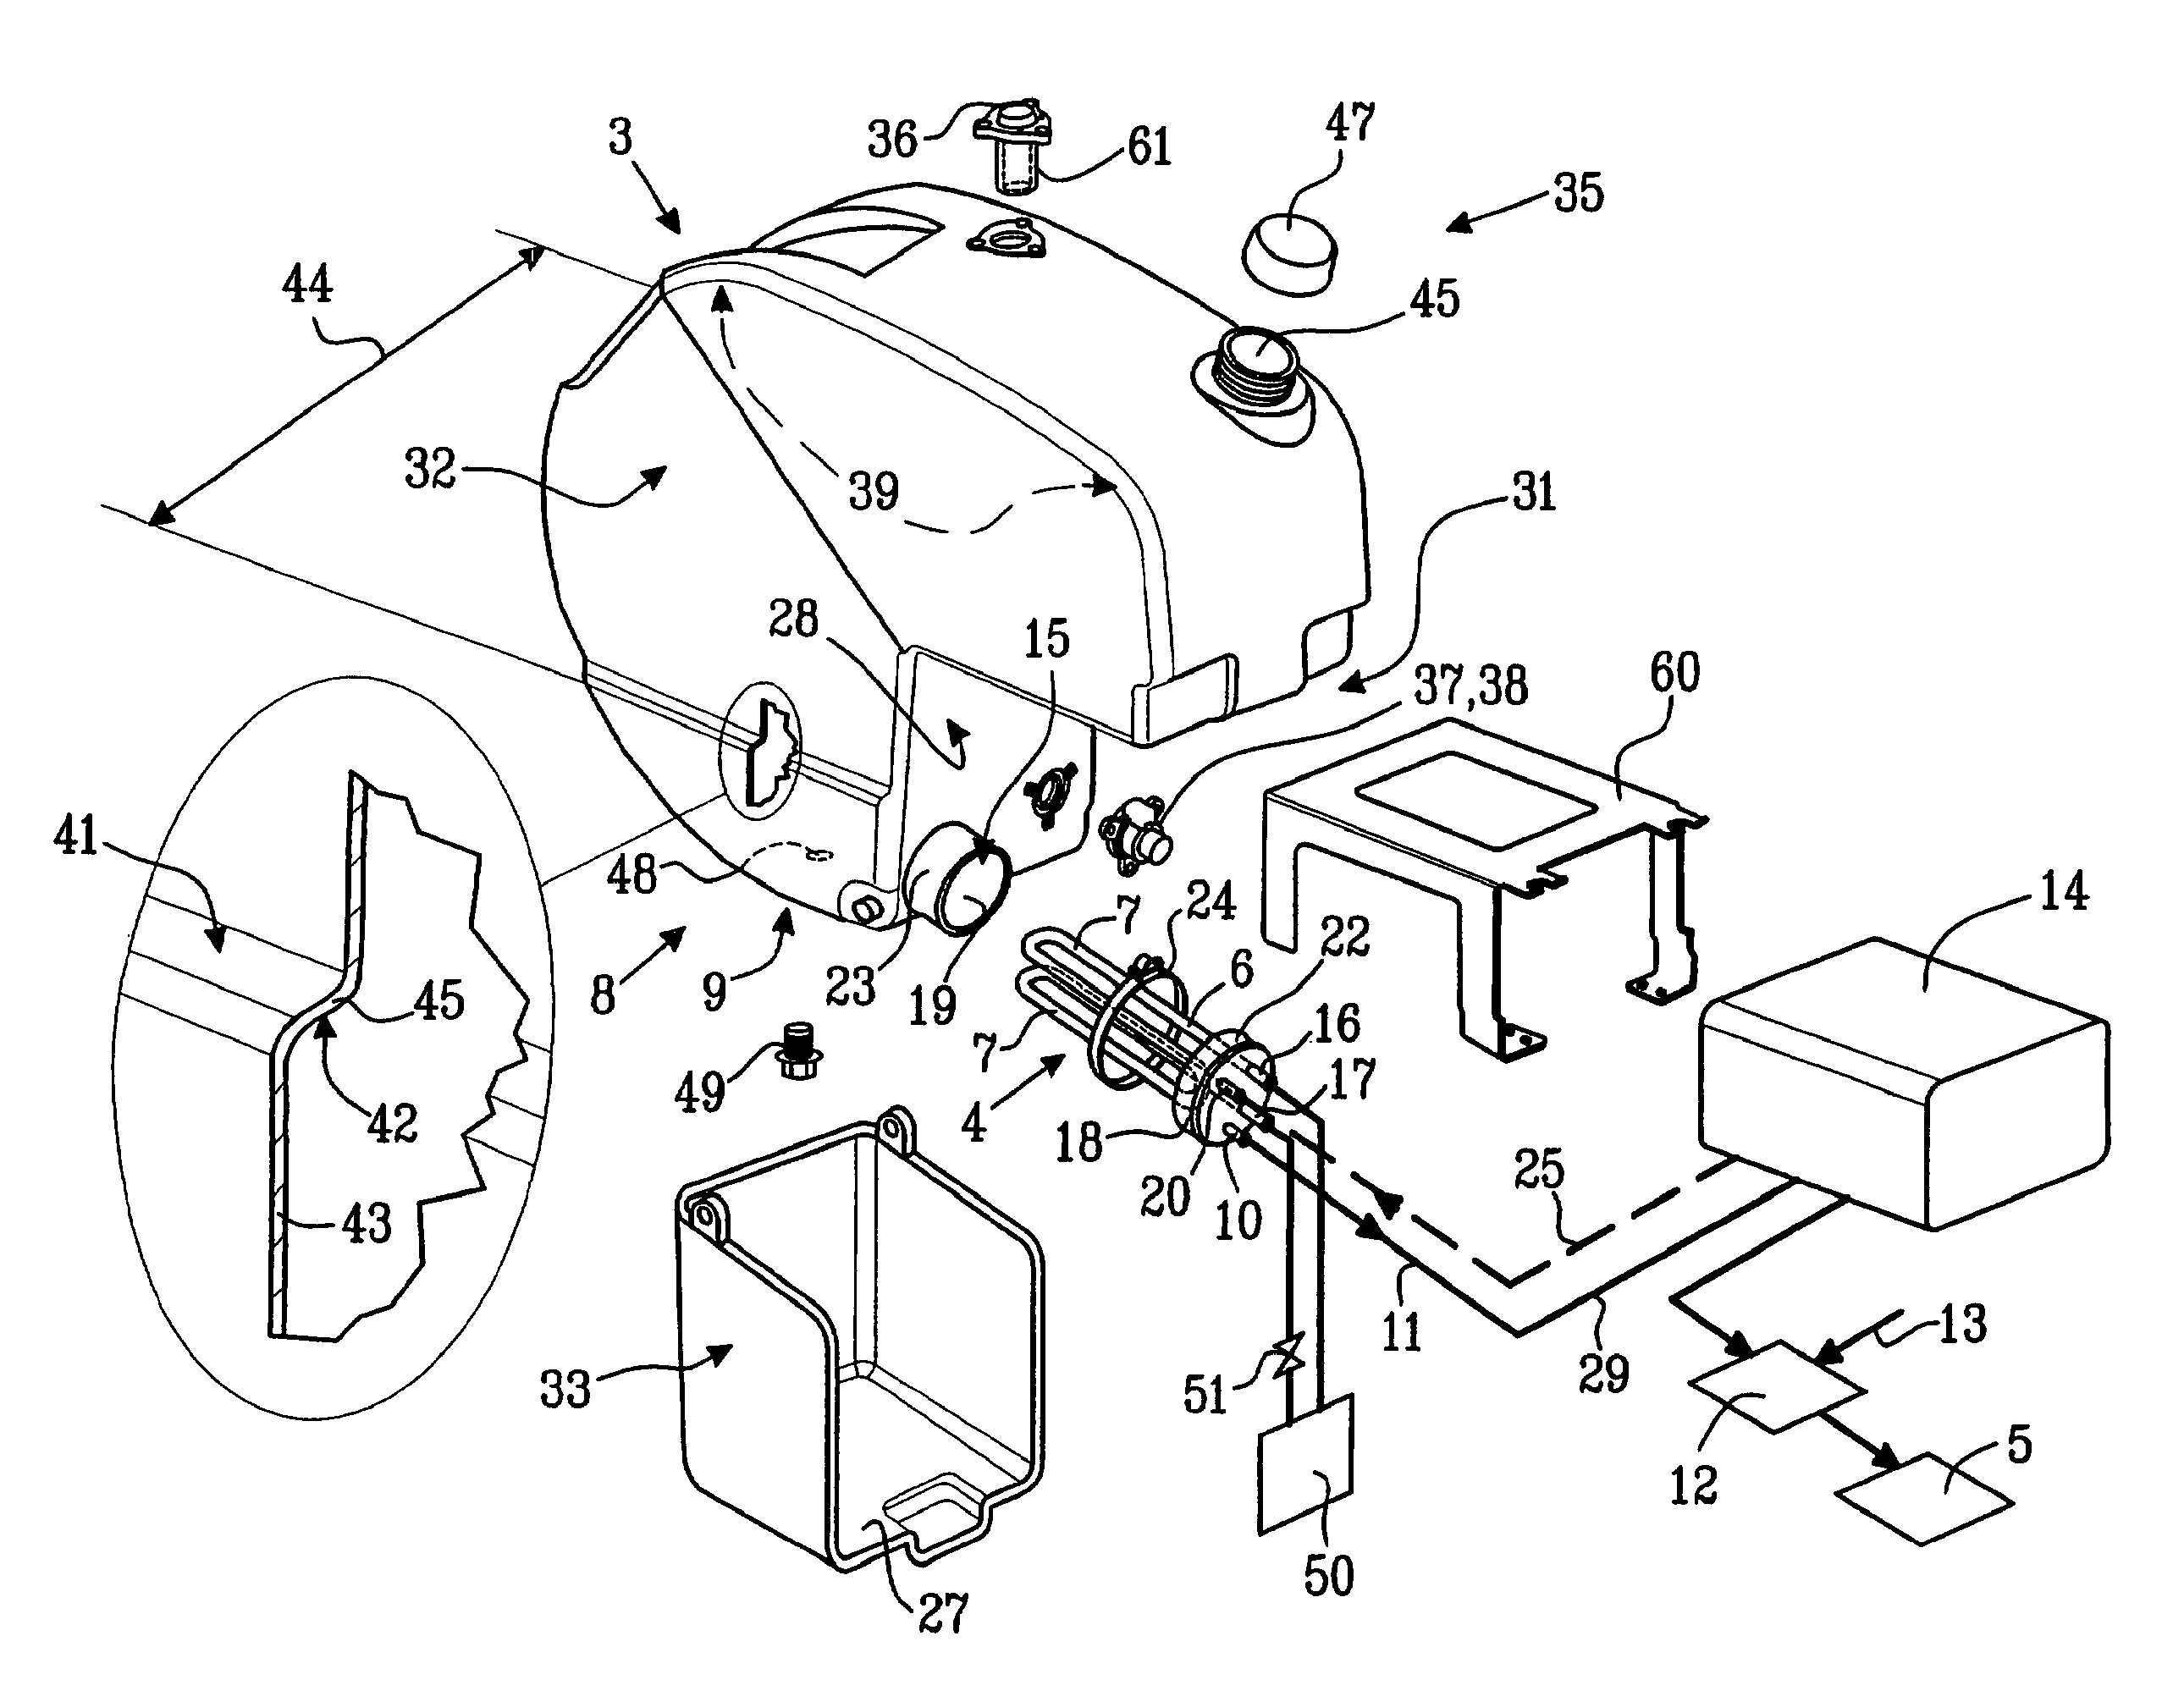 Device for heating